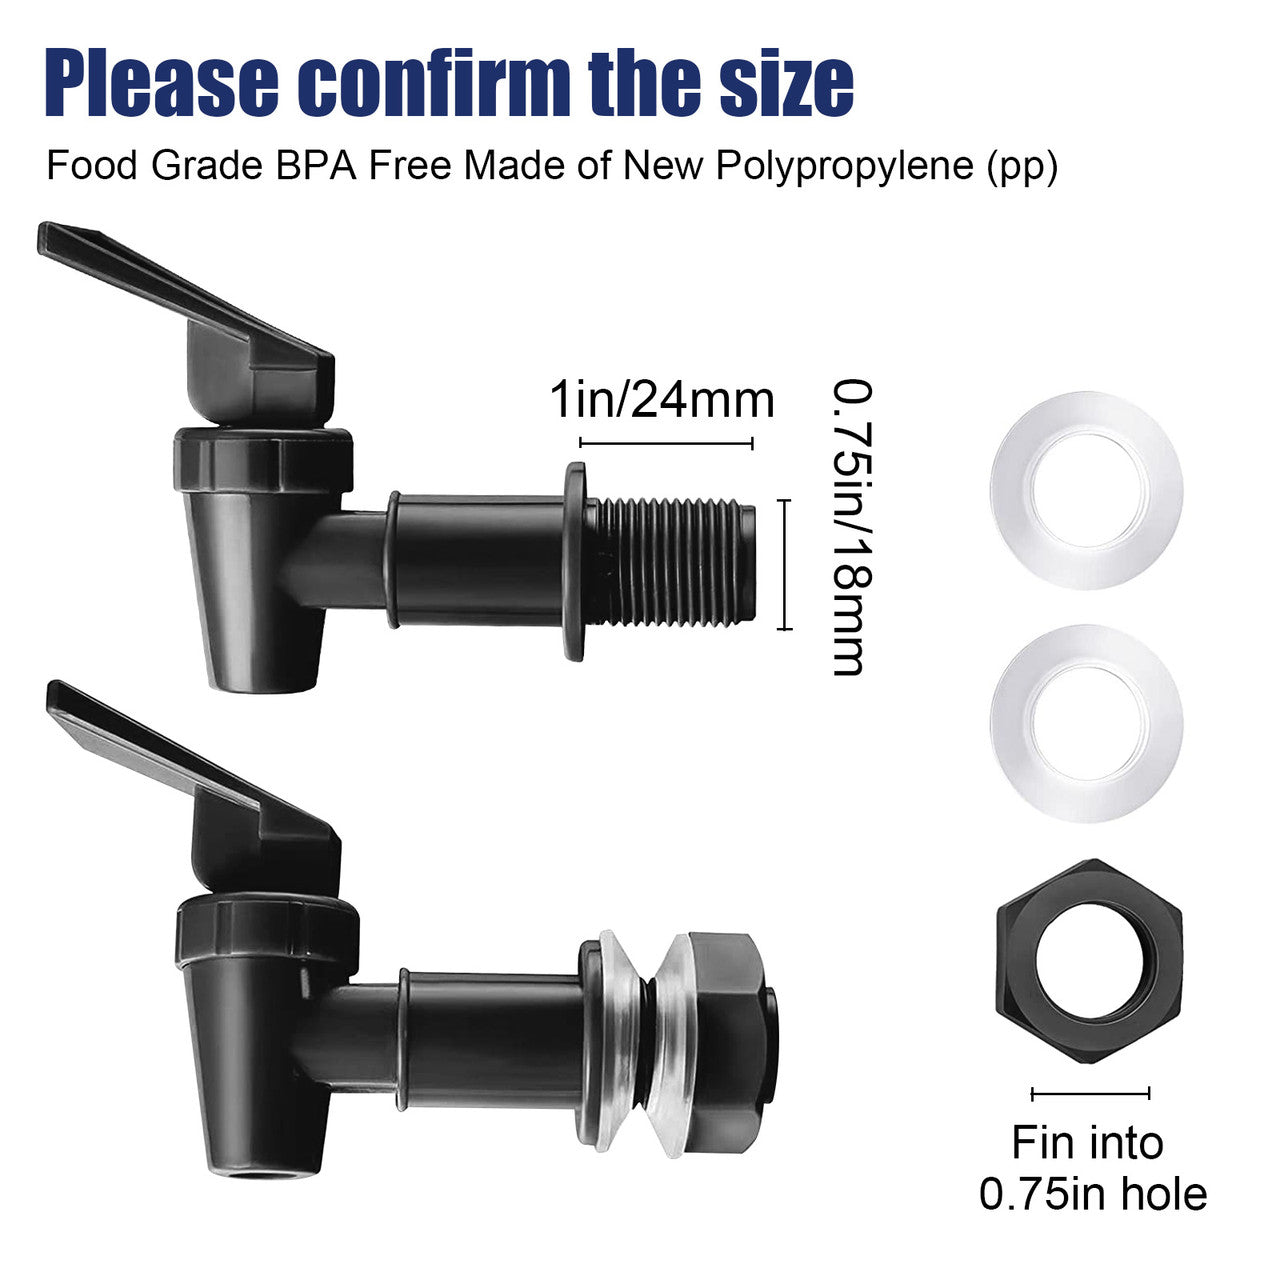 5 Packs Faucet Replacement Stem Dispenser Valve - BPA Free Replacement,Fits most water dispensers,buckets and more (Black/White/Blue)